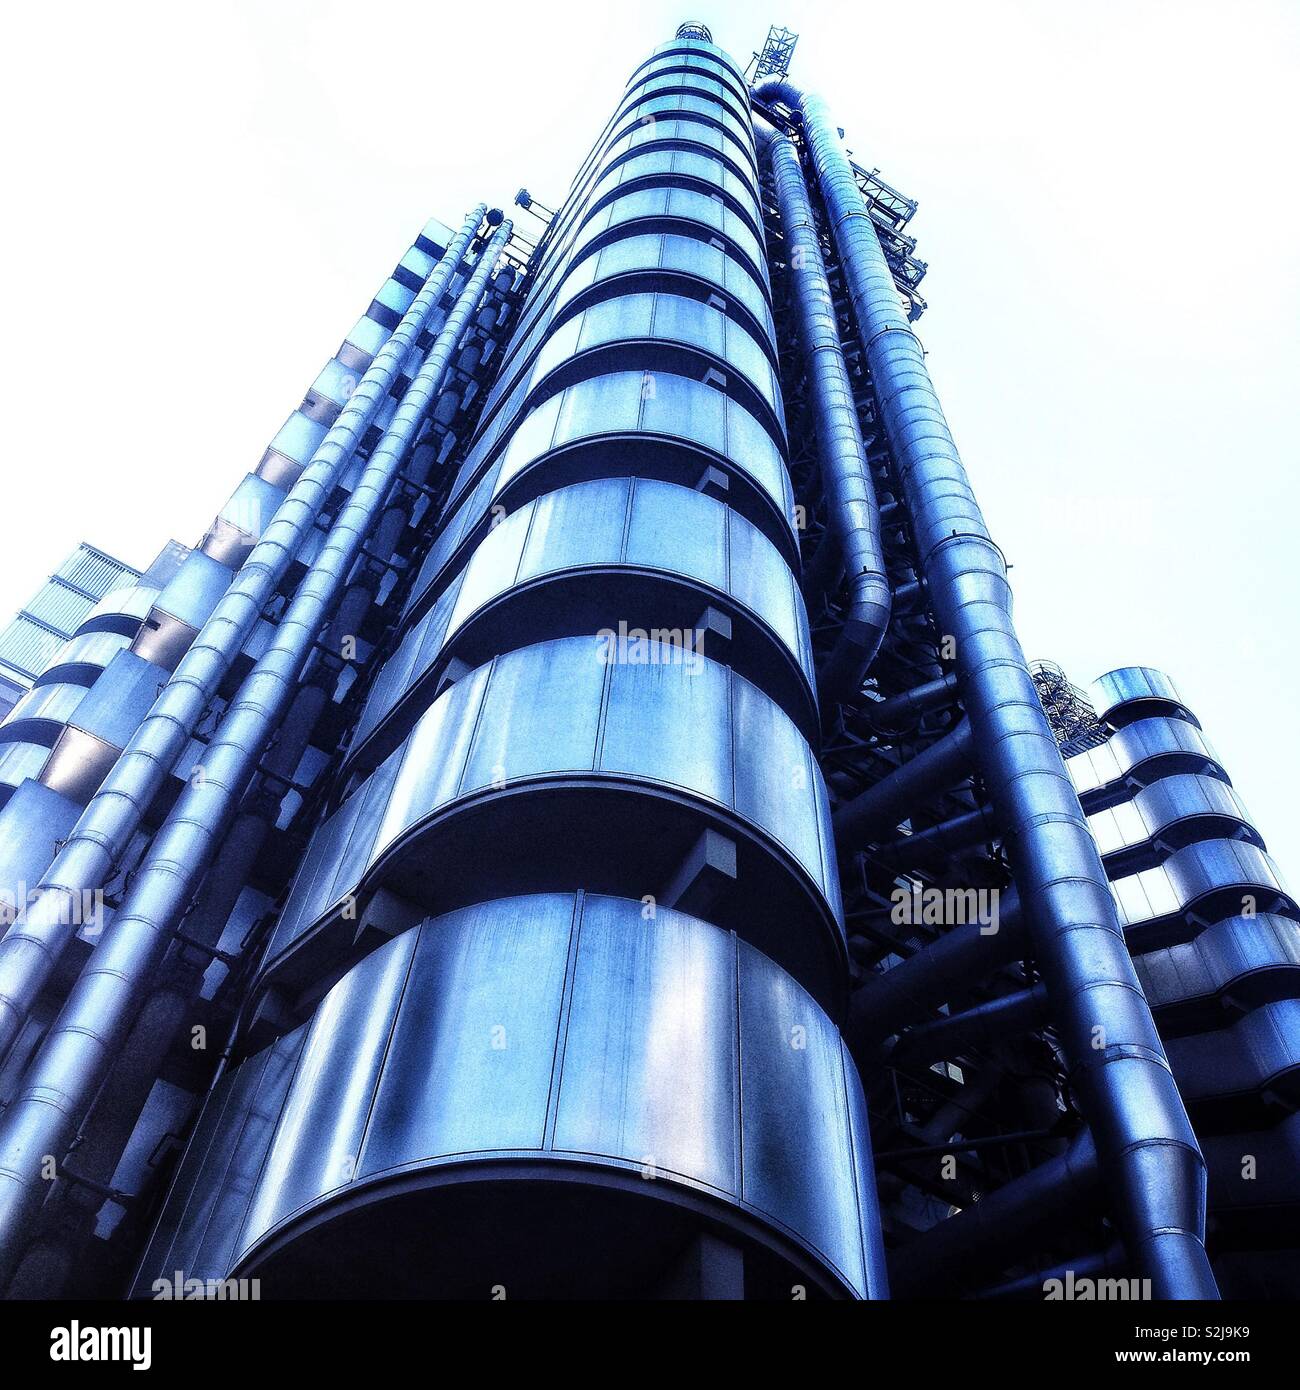 Detail of the Bowellism style of architecture of the stainless steel Lloyds building in the City of London, England, UK. Stock Photo